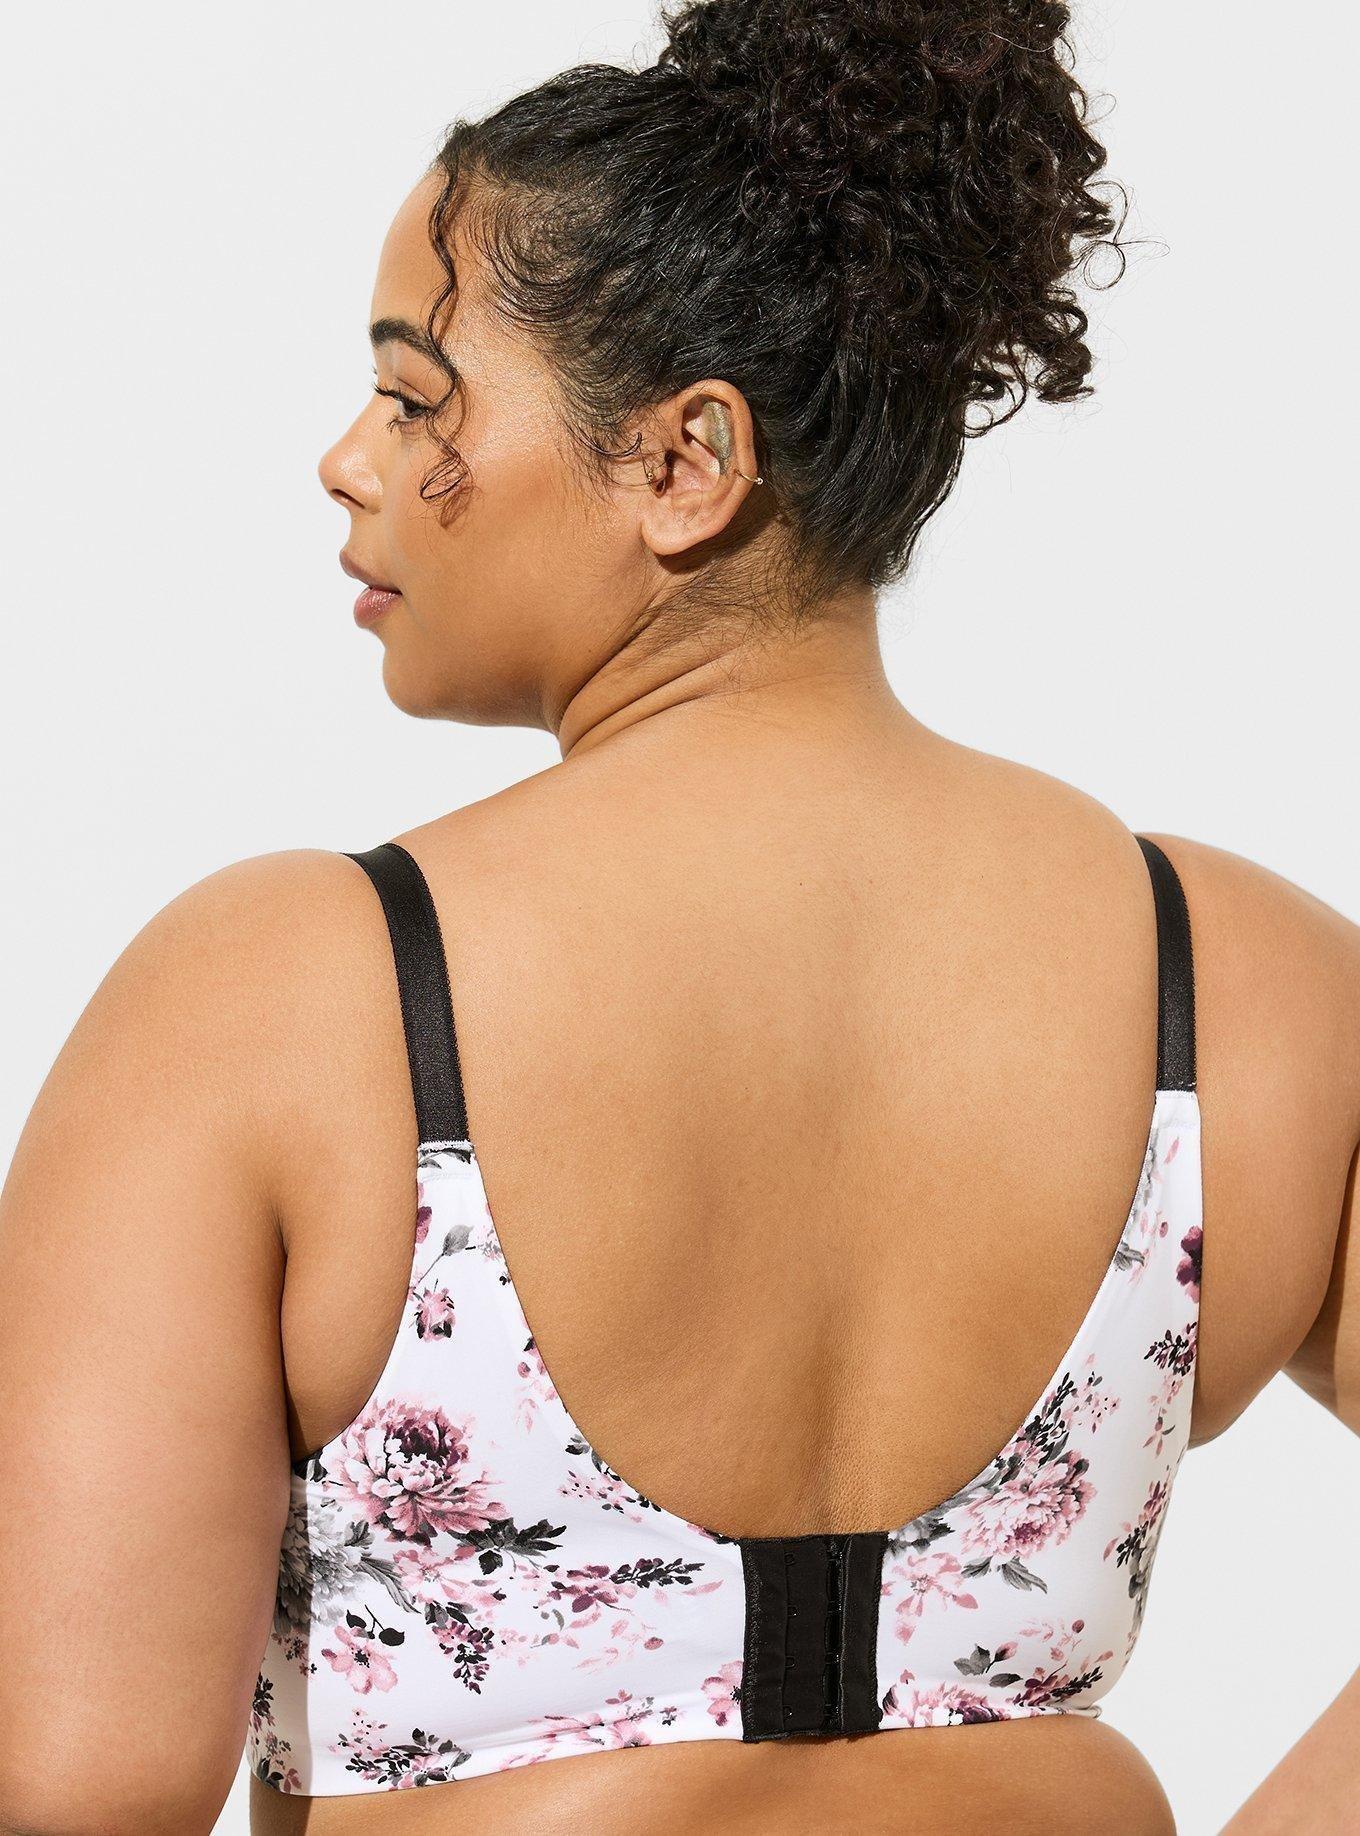 Torrid - Warwick Mall - Introducing our NEW Sexy Full Coverage Bra!